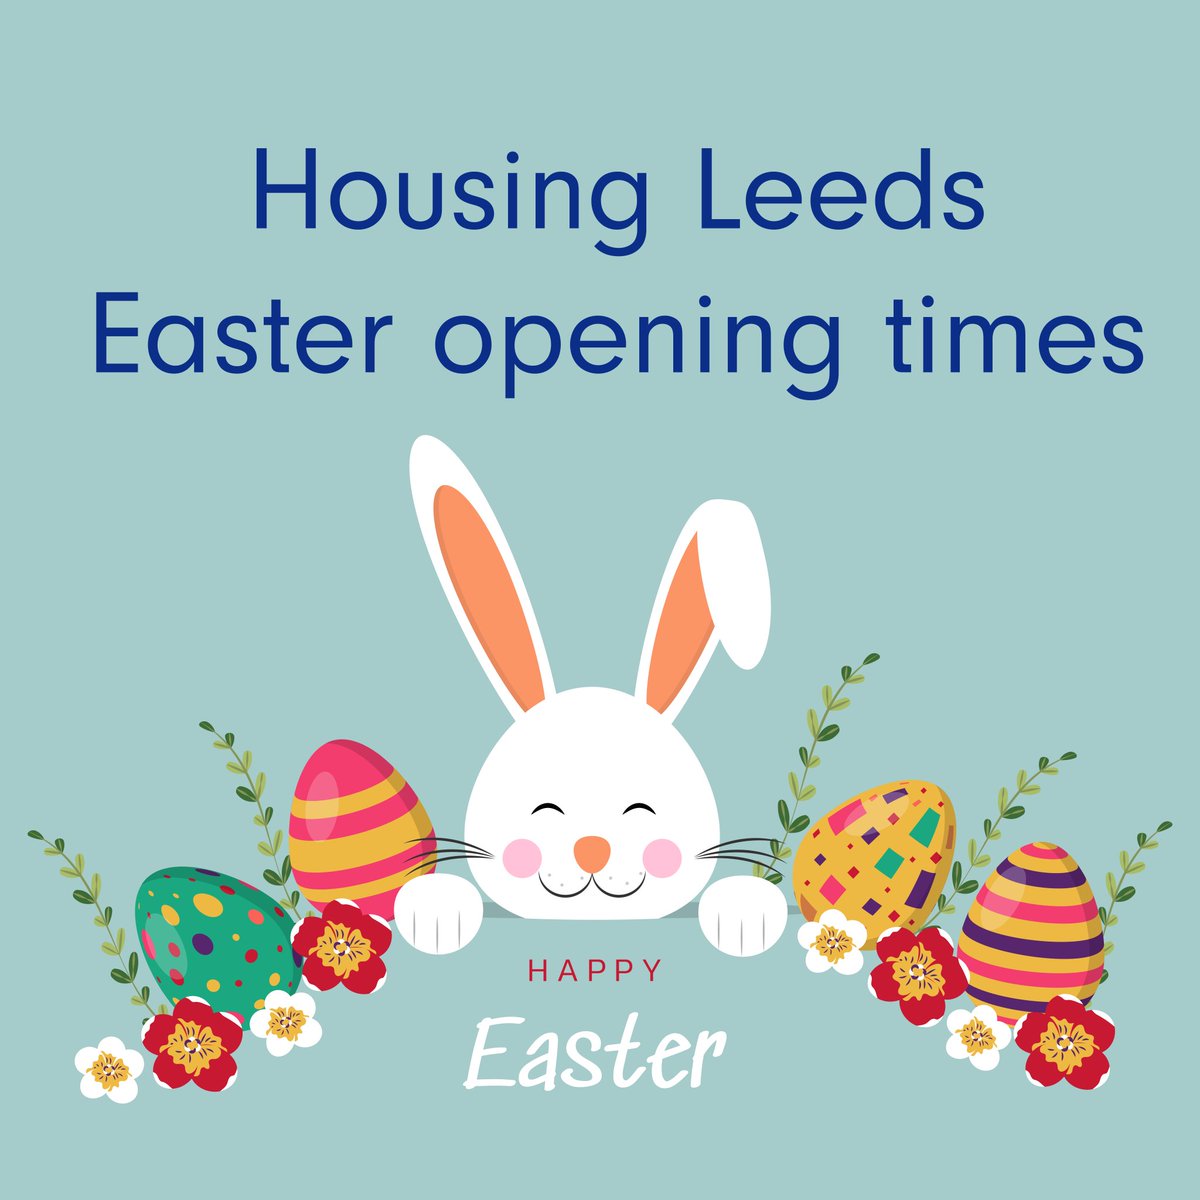 We will be closed from 5pm on Thursday 28 March until Tuesday 2 April. You can call an alternative number 0113 535 1035 for urgent enquiries. If you have an emergency where you consider there is a serious risk to life or property, please contact the emergency services.